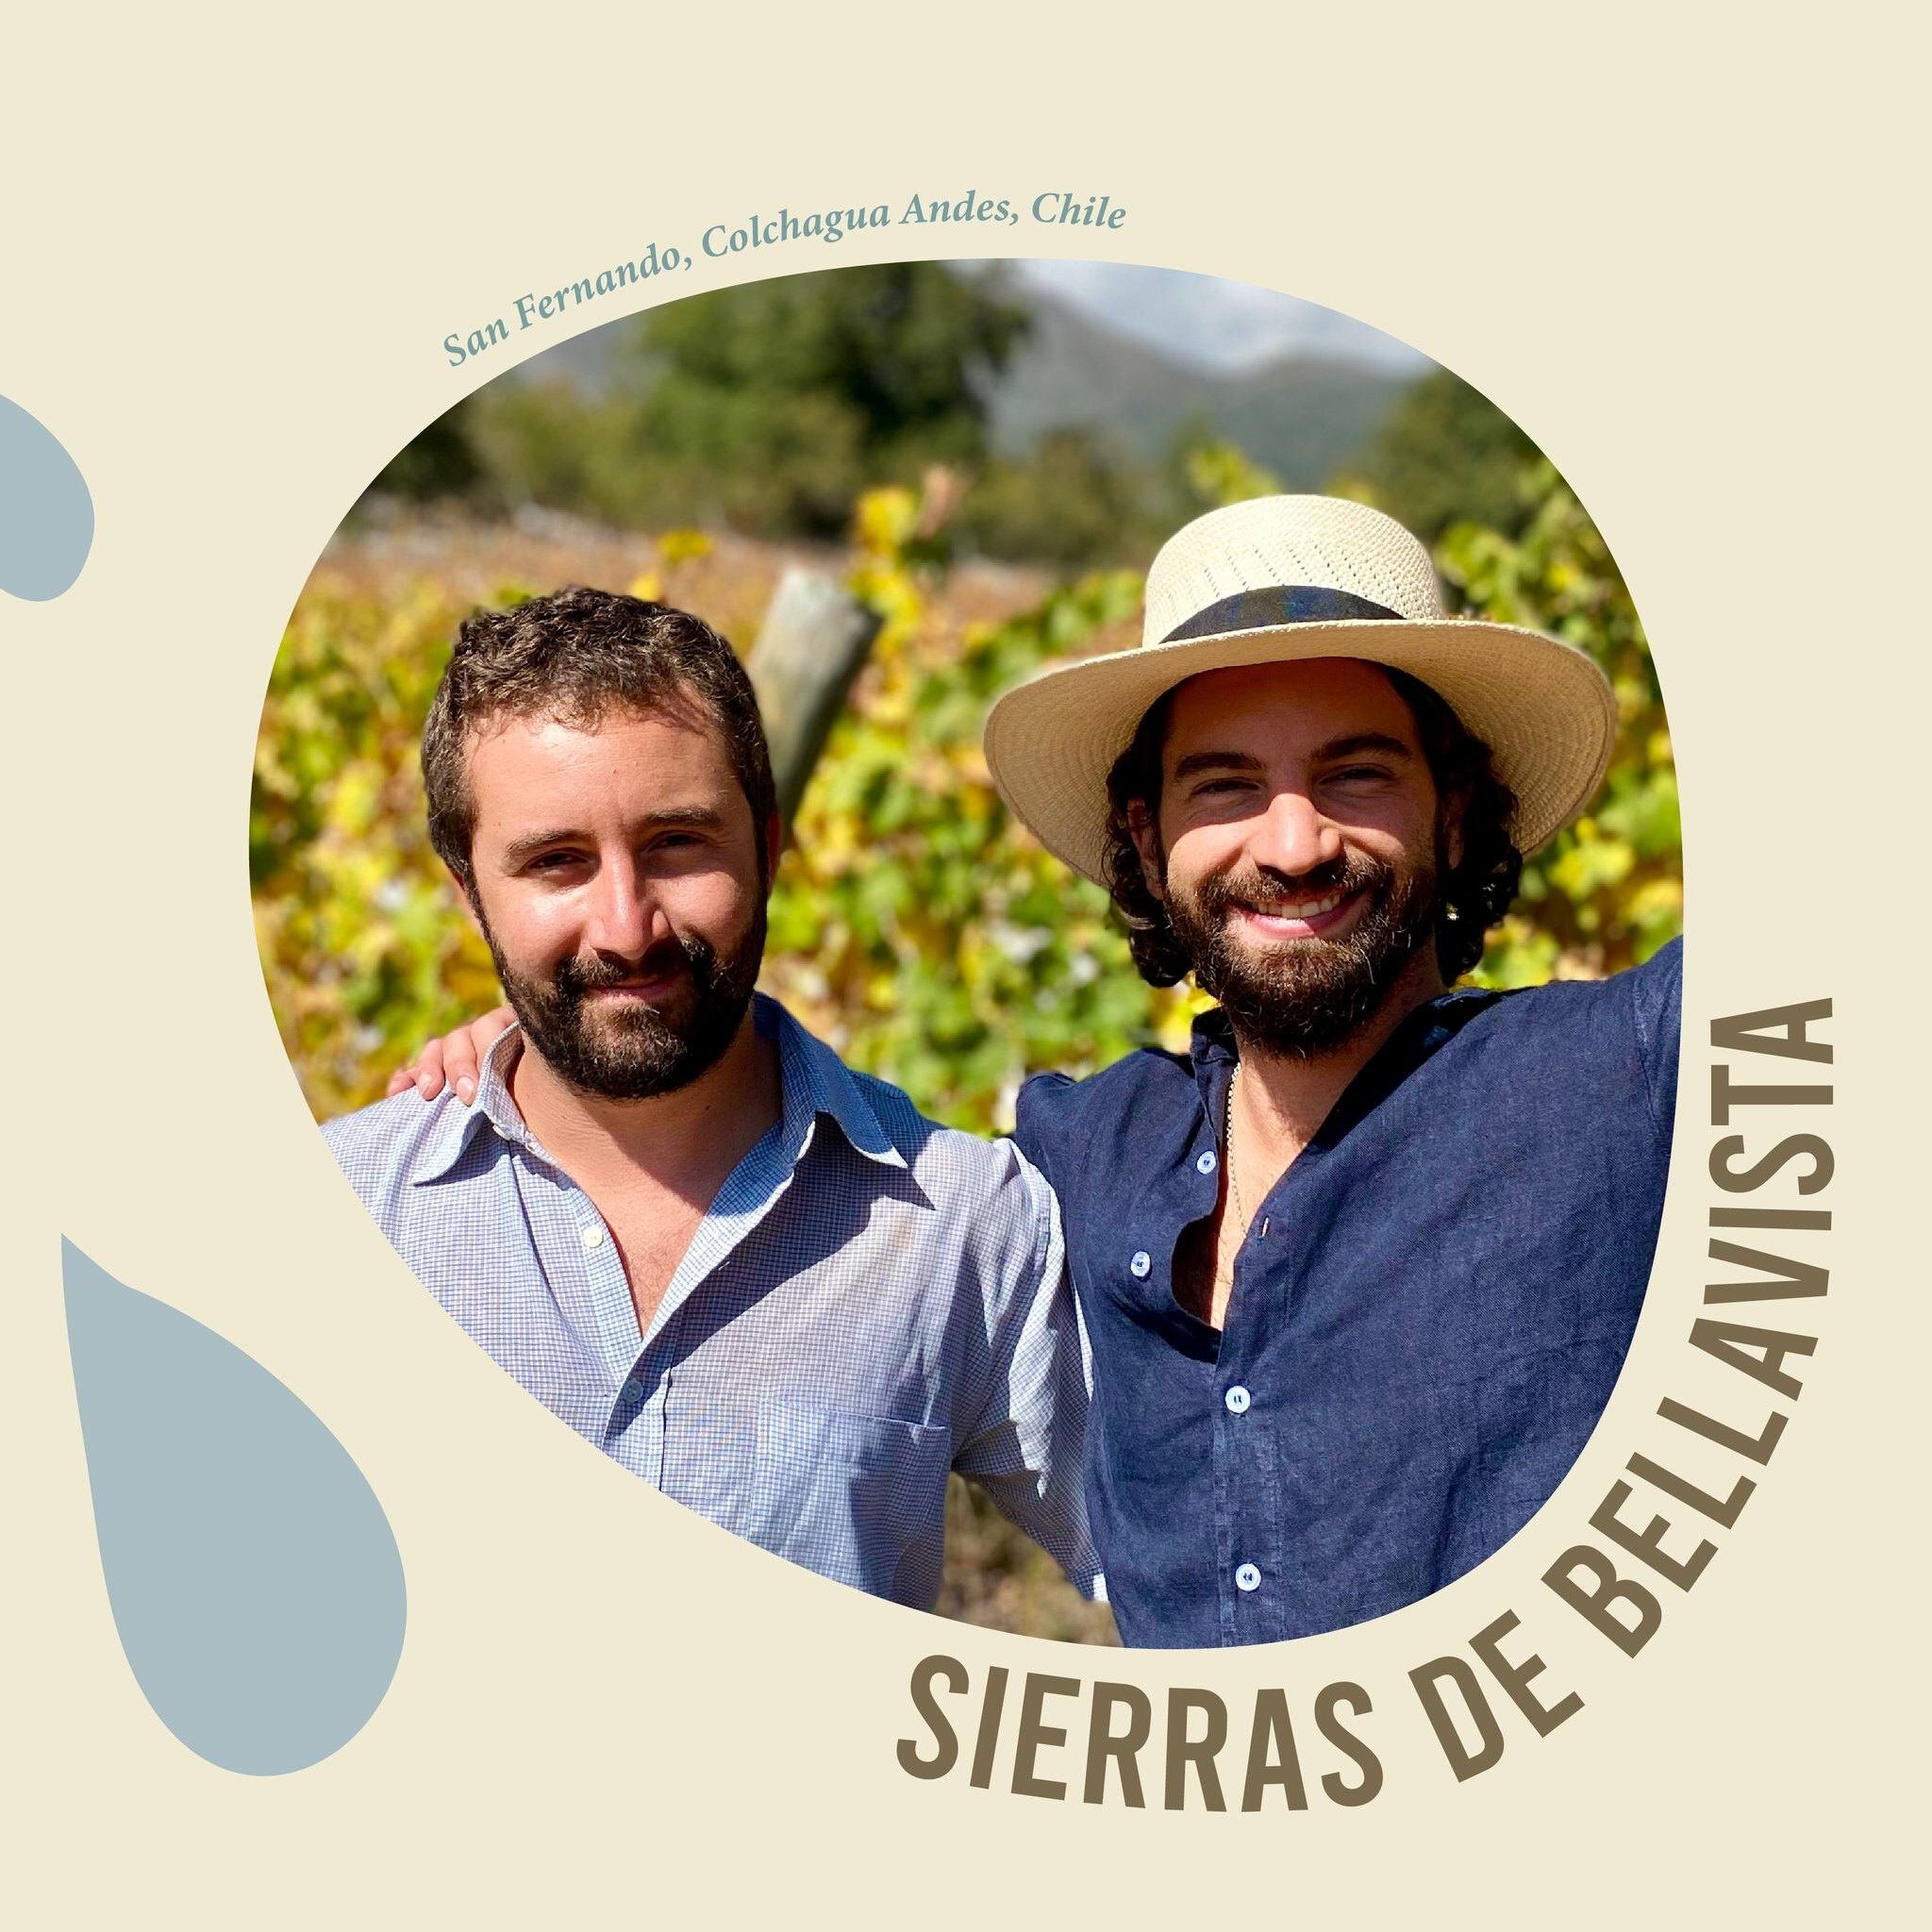 This week, we're excited to welcome Sierras de Bellavista, giving us a chance to admire their amazing wines. 

From a conversation between Camilo Rahmer and Jacques Ergas that took place during the summer of 2010, a dream was born. Camilo and Jacques